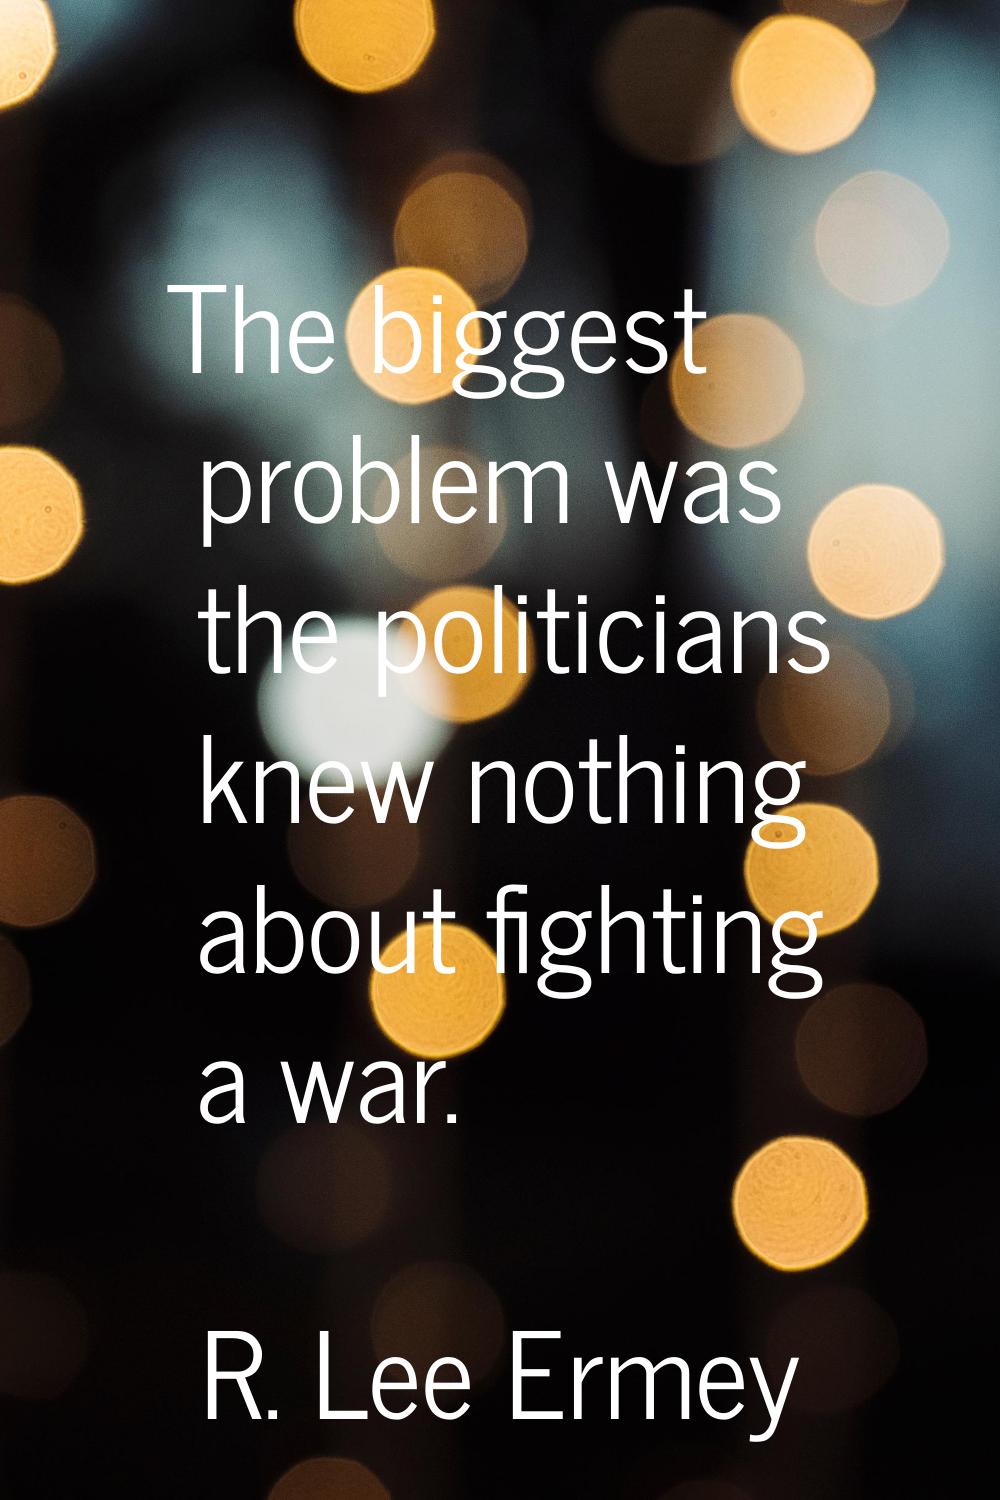 The biggest problem was the politicians knew nothing about fighting a war.